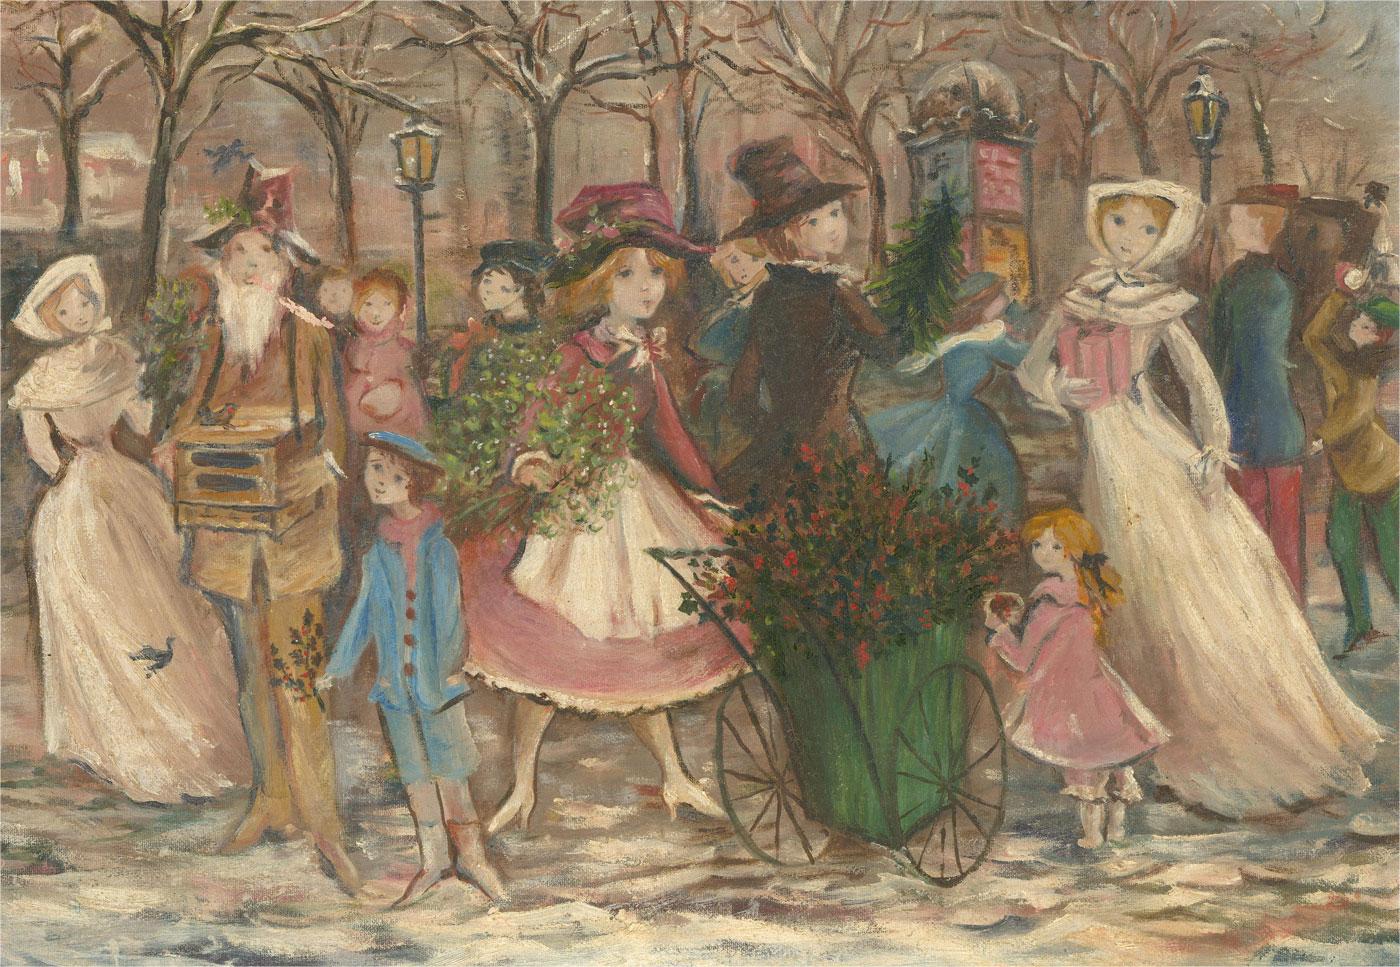 A charming Christmas scene depicting a crowd at a market. Figures carry mistletoe and holly branches for wreaths while others clutch their Christmas shopping tightly as they make their way down the snow covered street. Inspiration from Emilio Grau